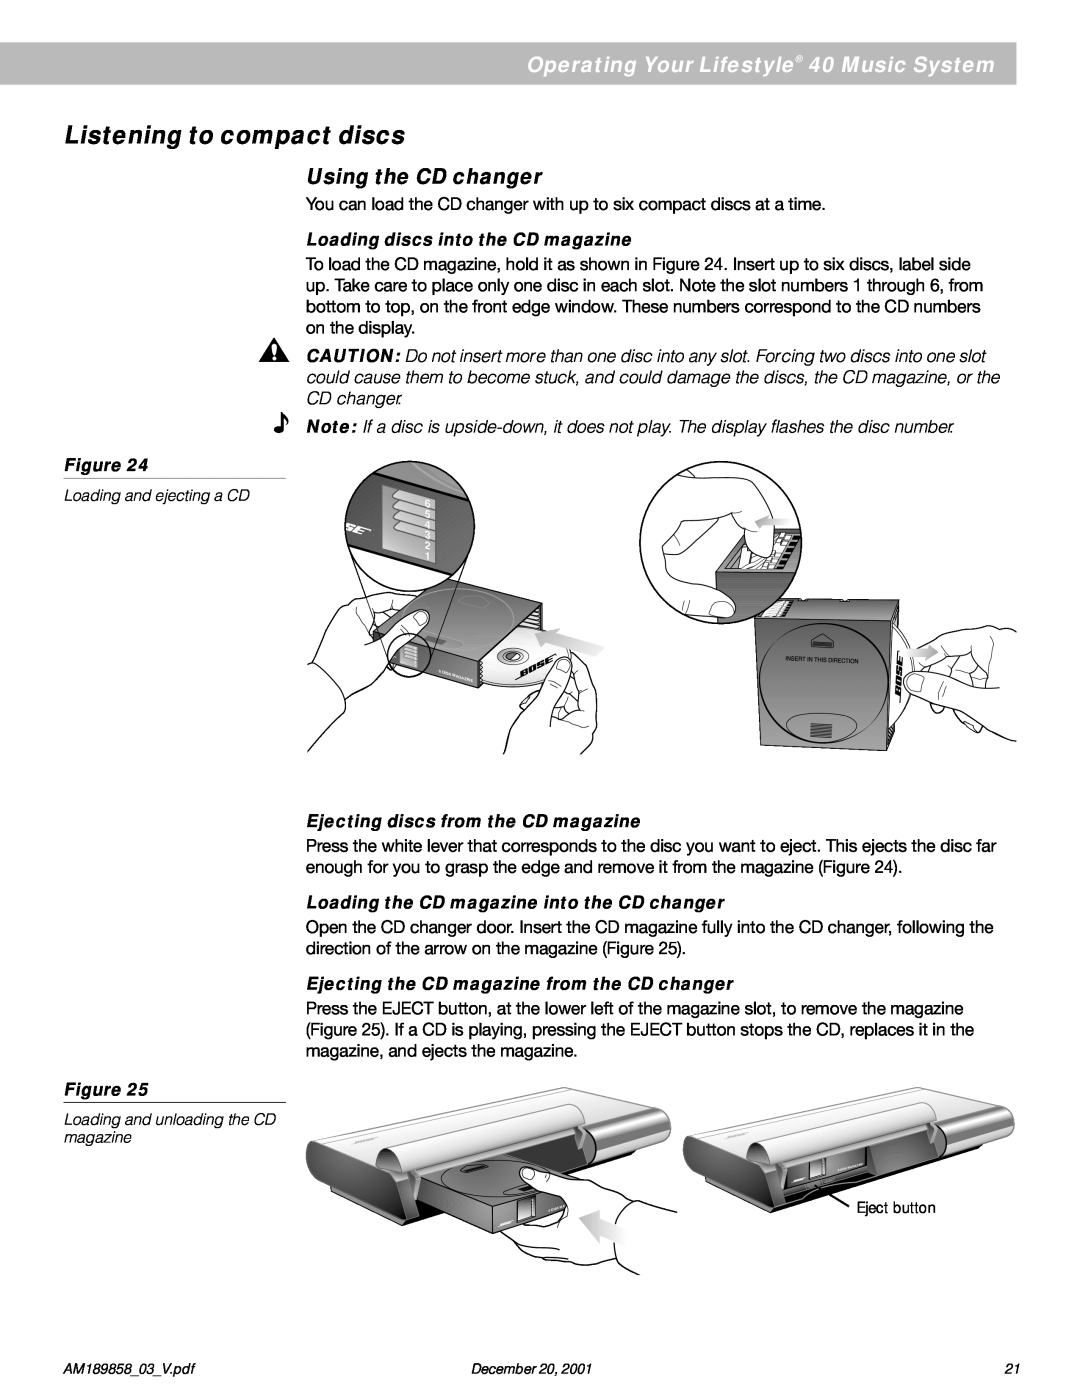 Bose manual Operating Your Lifestyle 40 Music System, Using the CD changer, Figure, Loading discs into the CD magazine 